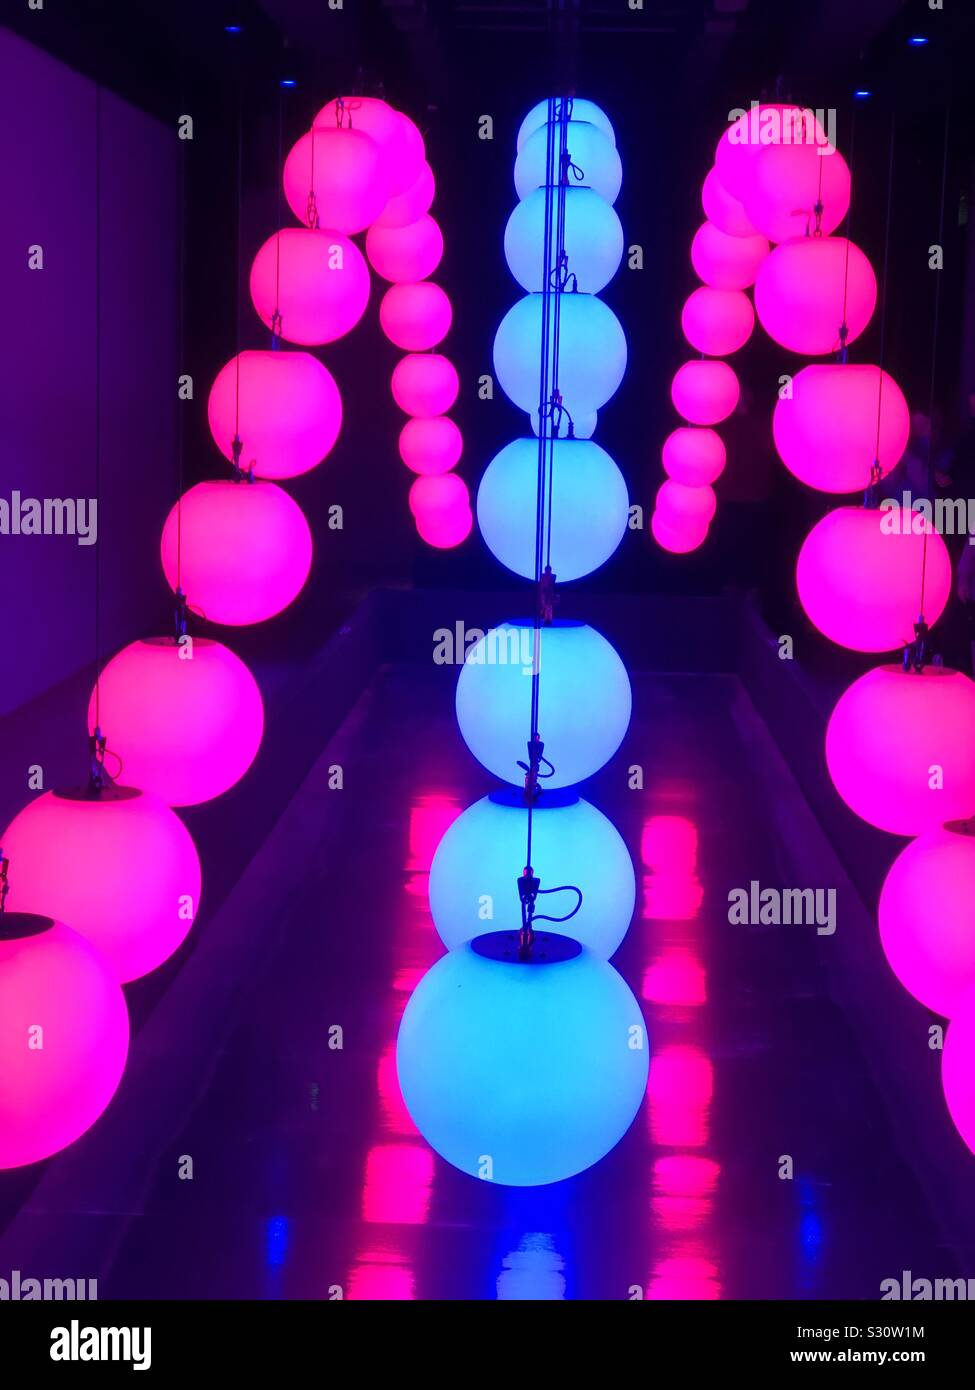 A kinetic Christmas light sculpture with lighted orbs raised and lowered to music to form patterns. Stock Photo